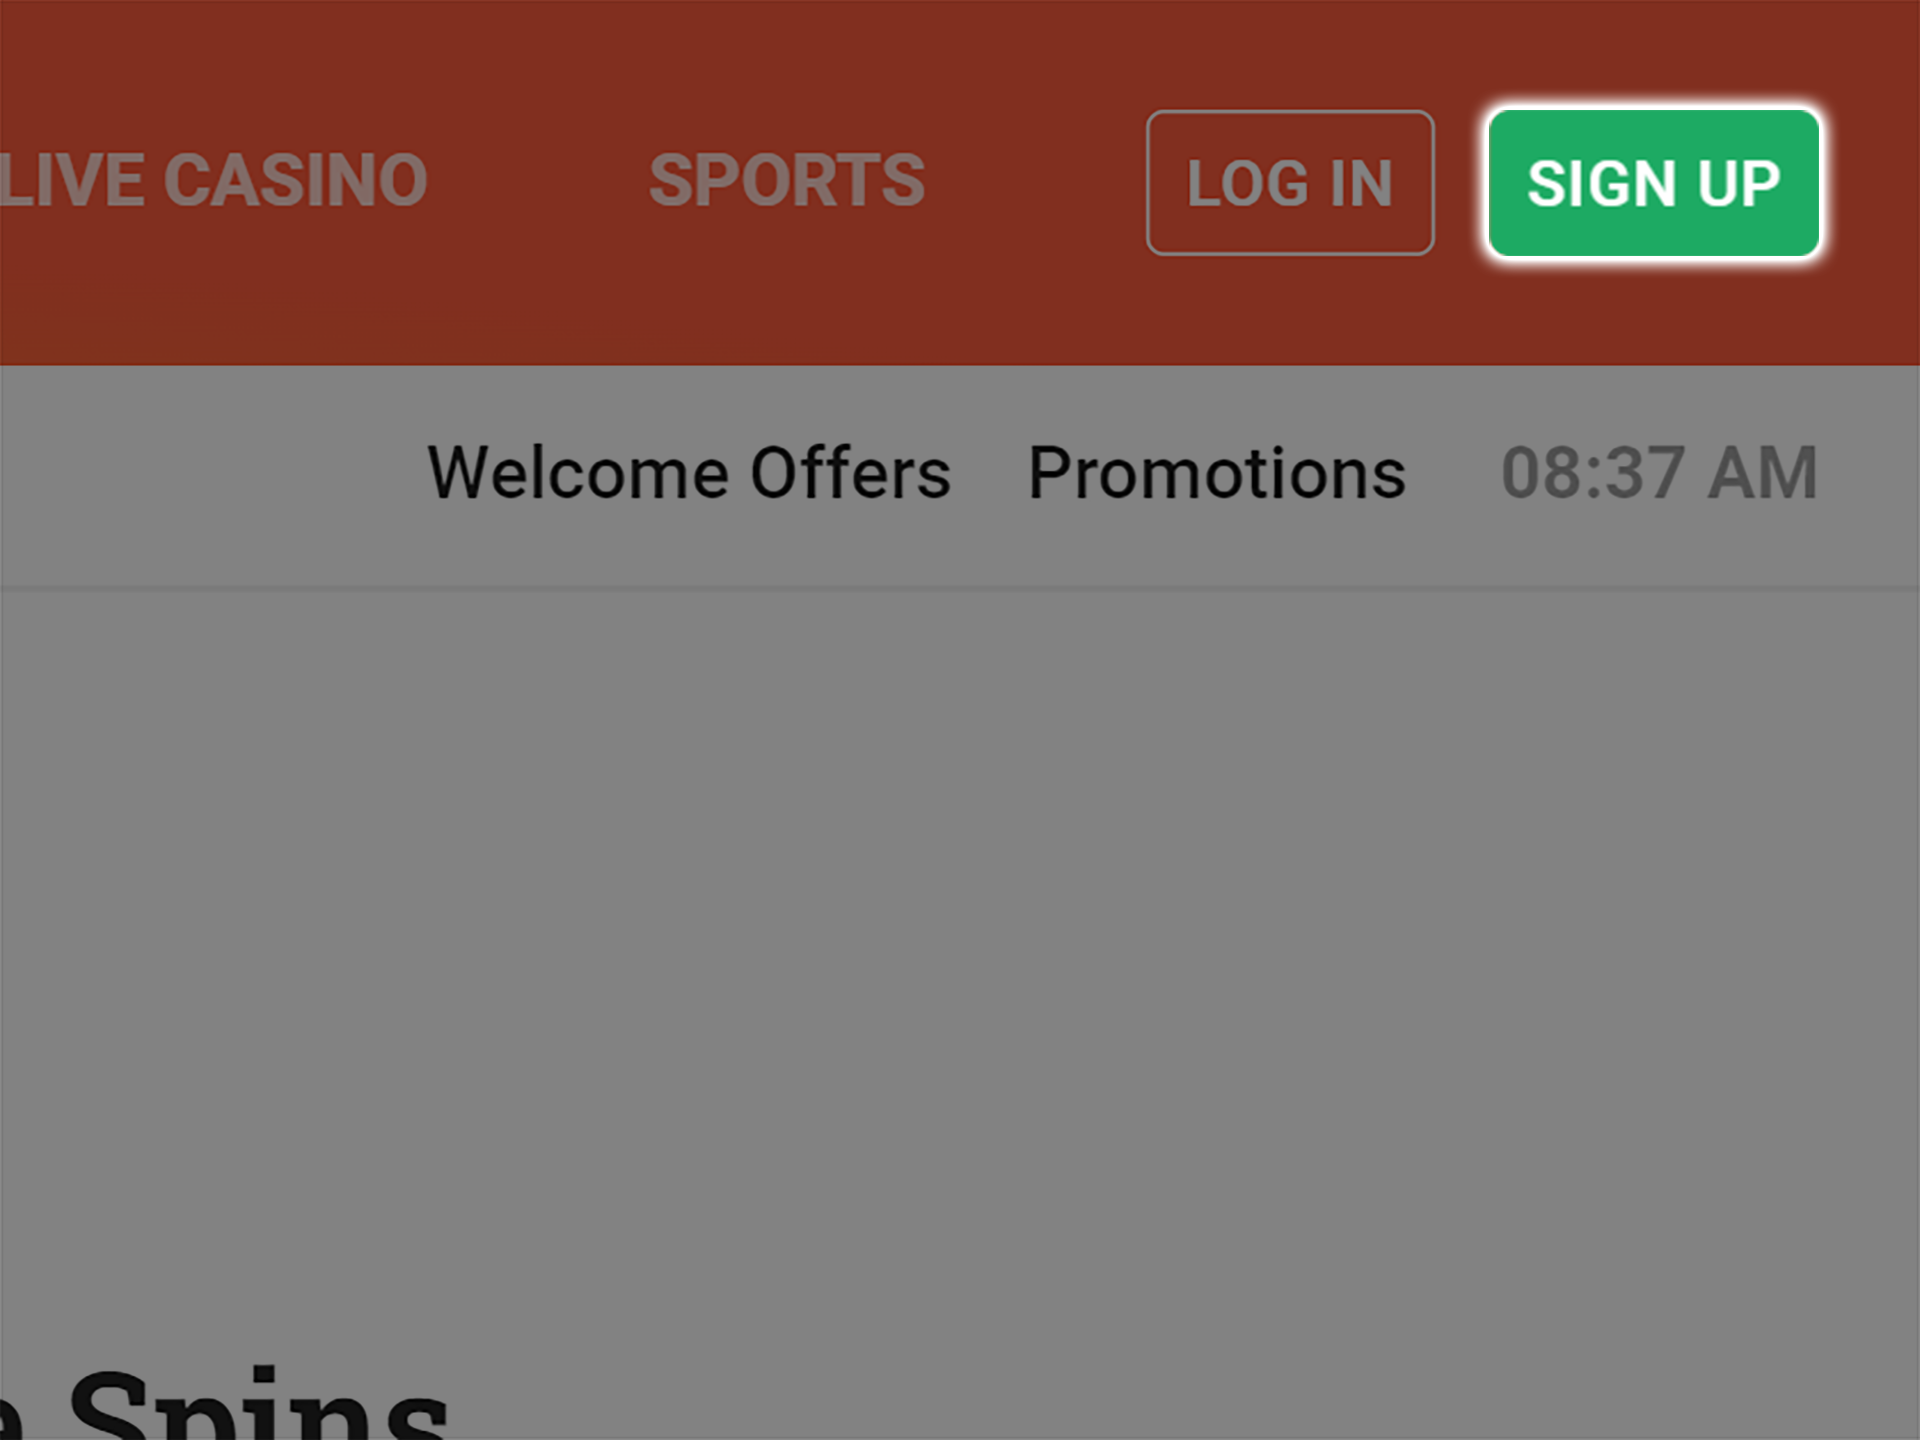 To start registering at Leovegas, click on the sign up button.